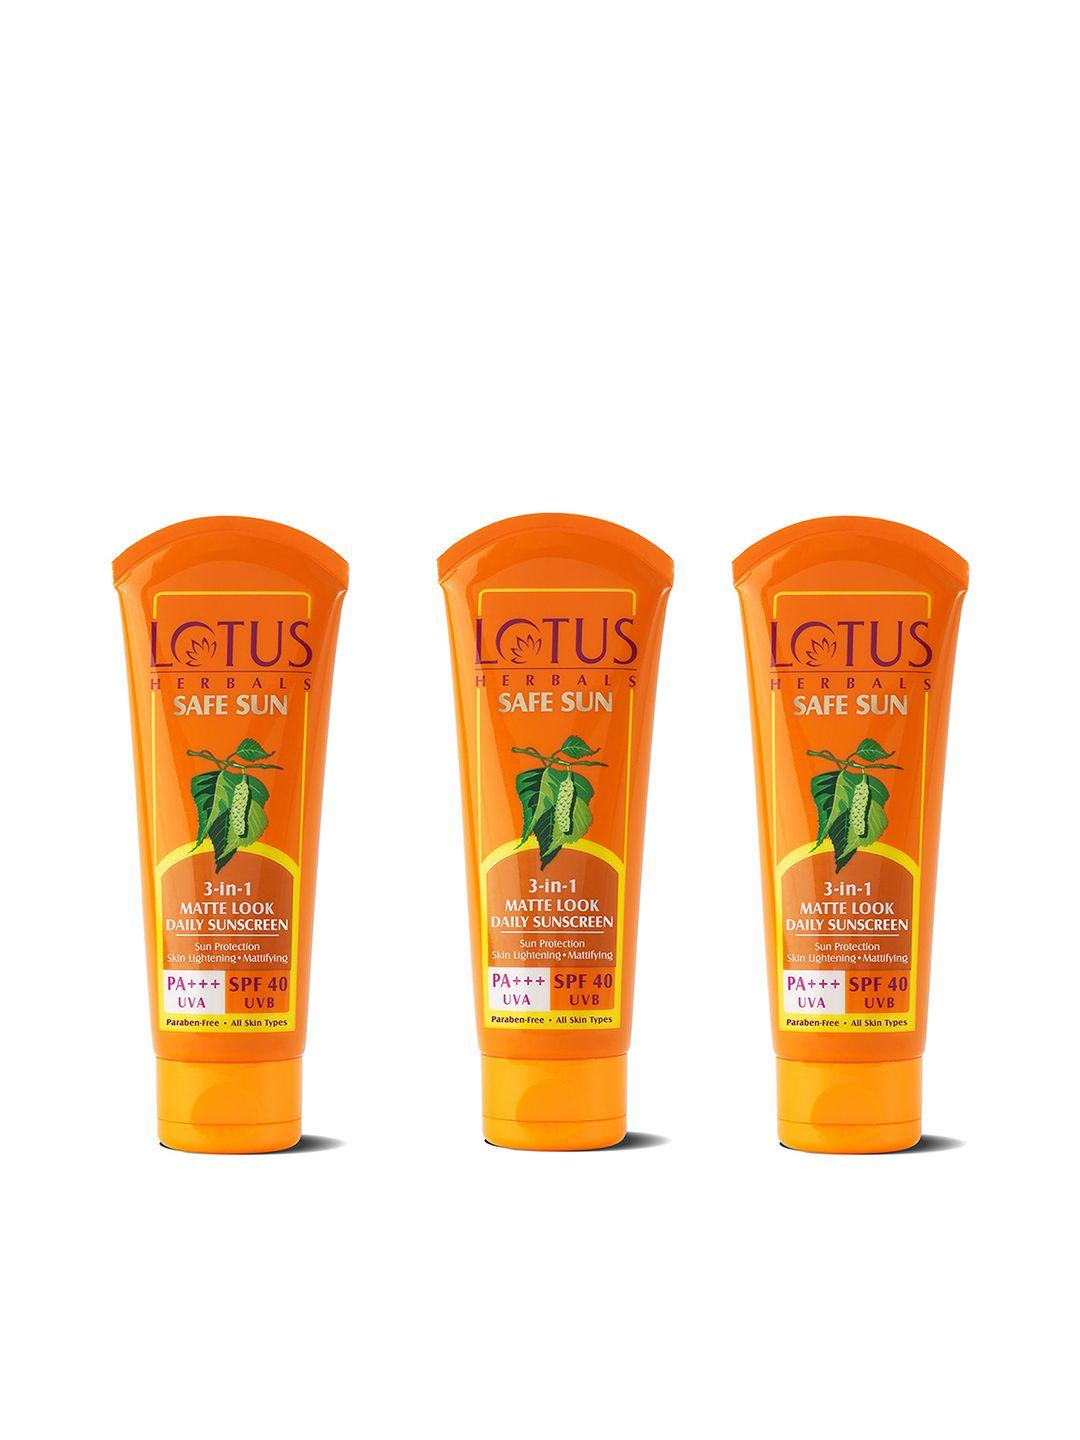 Lotus Herbals Set of 3 Safe Sun 3-In-1 Matte Look SPF 40 PA+++ Daily Sunscreen - 50g Each